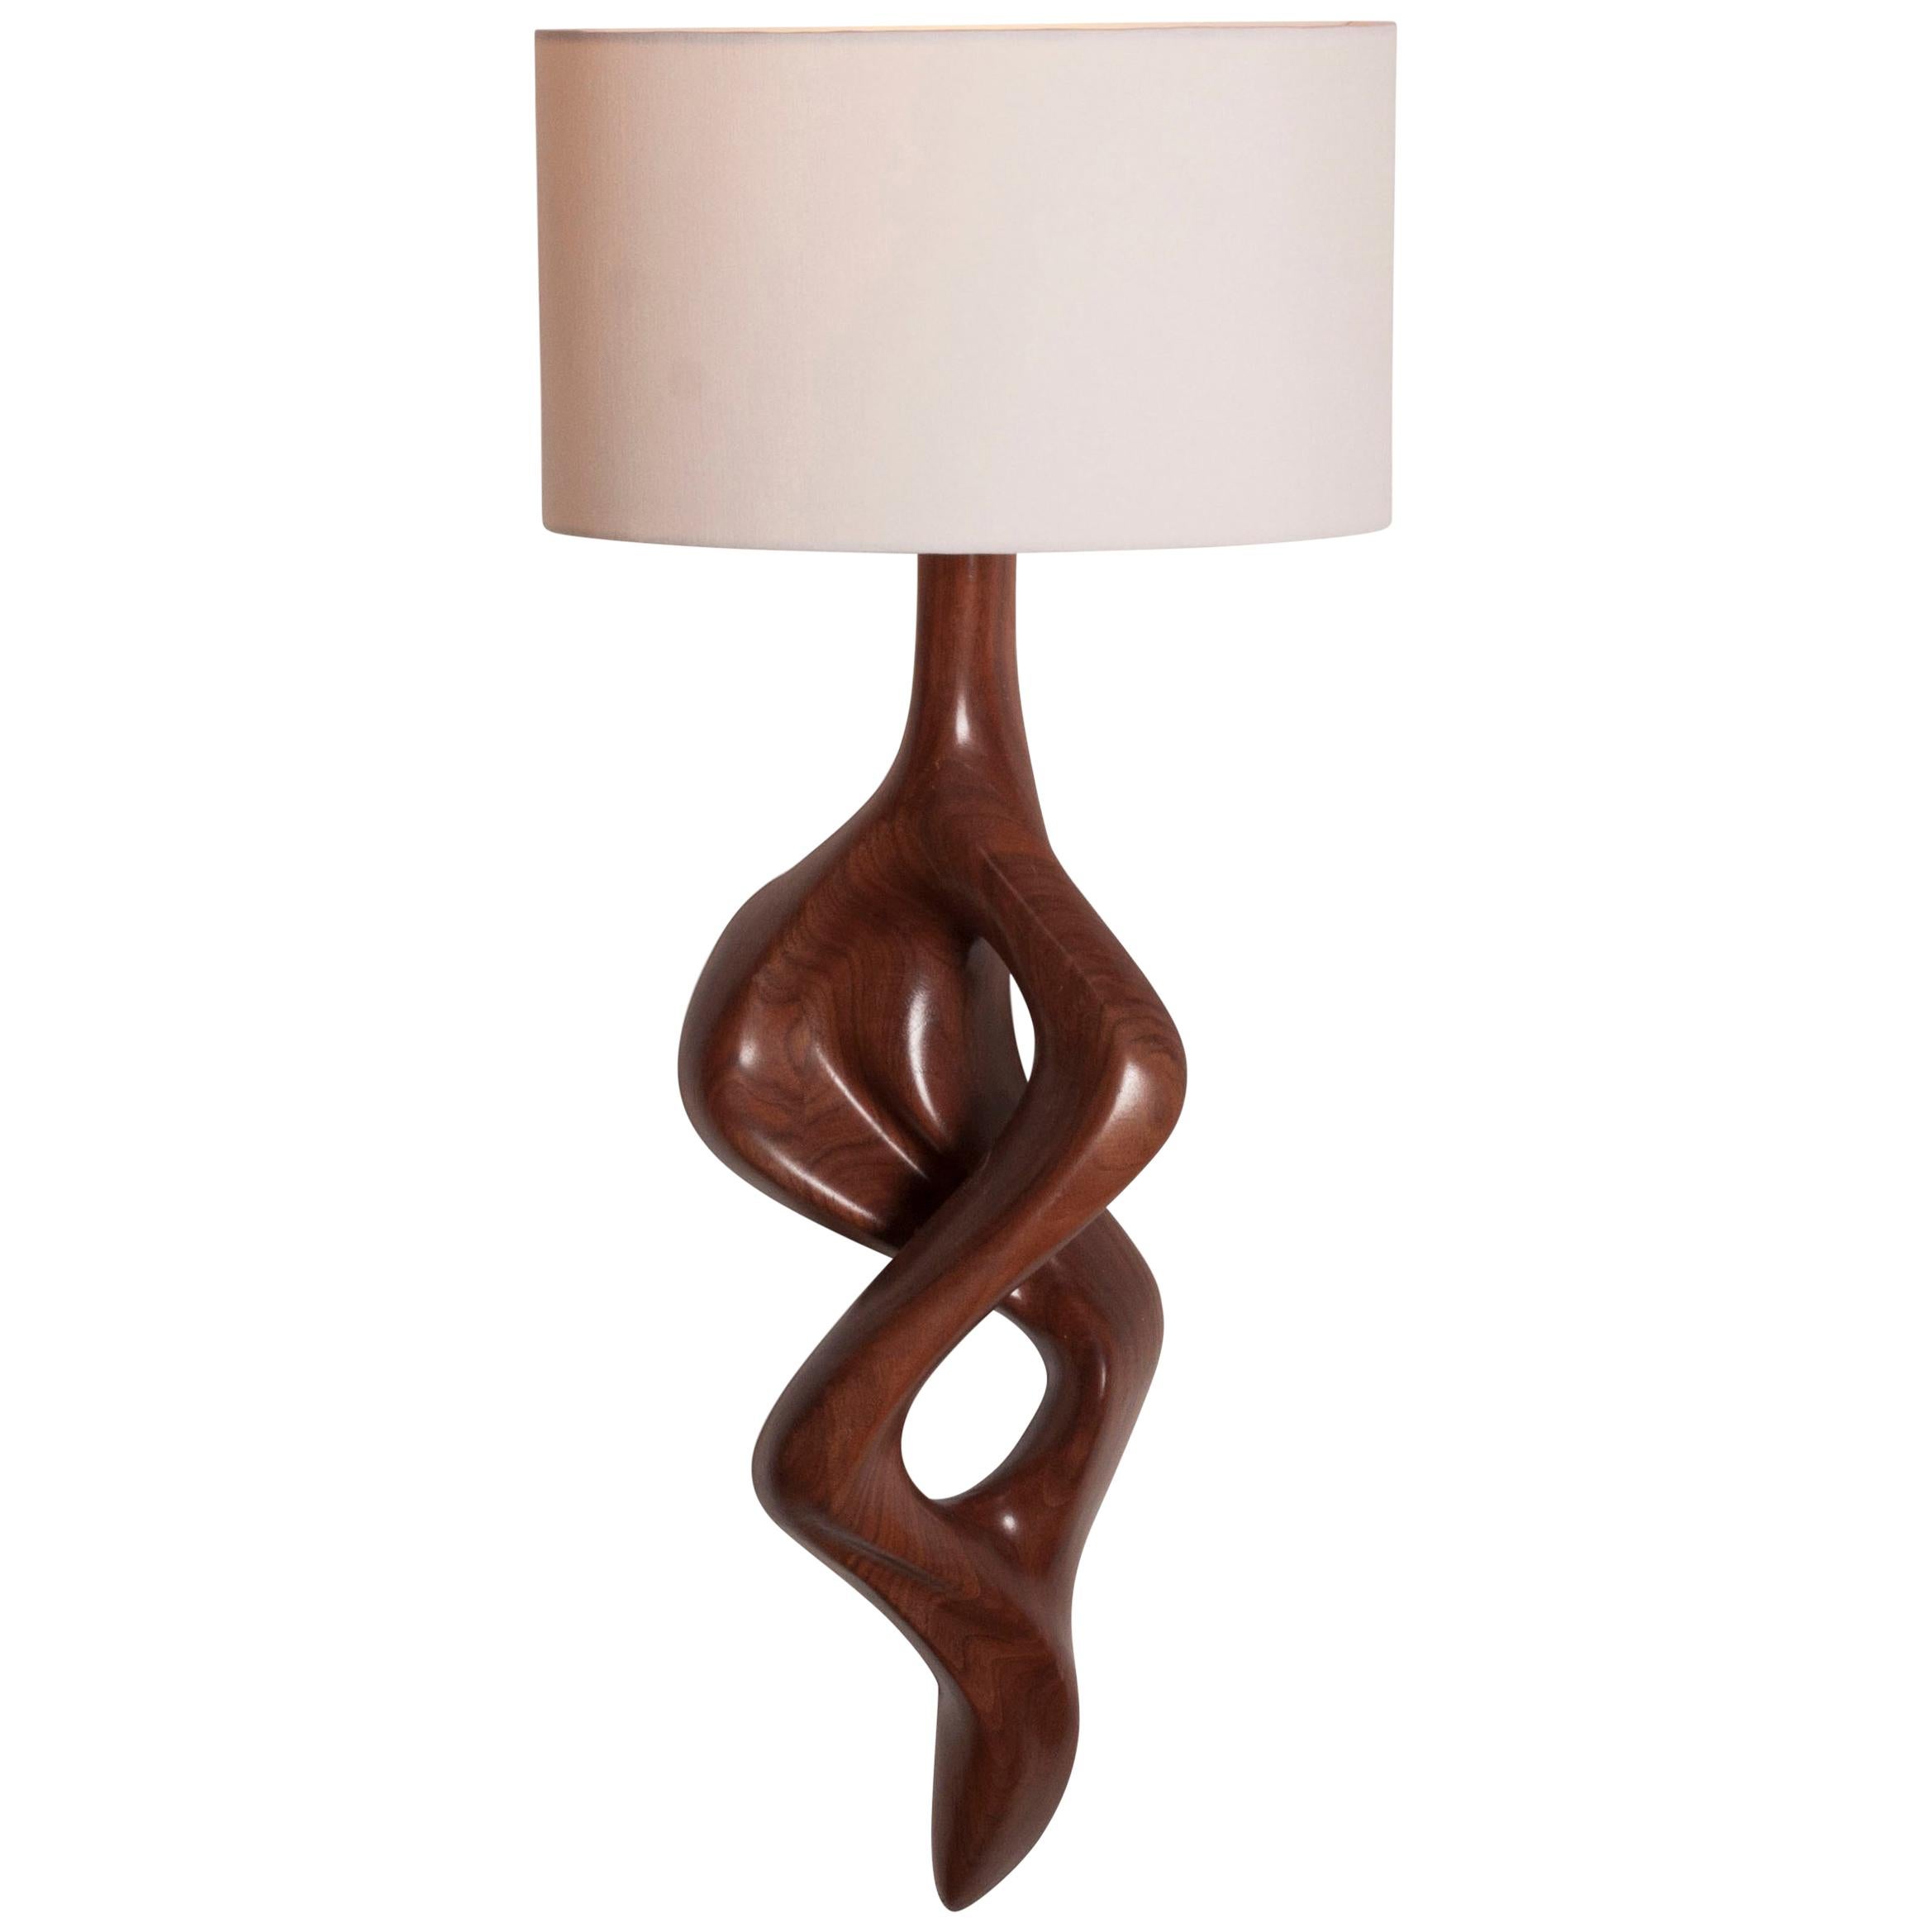 Amorph Nomi Sconces Natural stain on Walnut wood with Ivory Shade For Sale